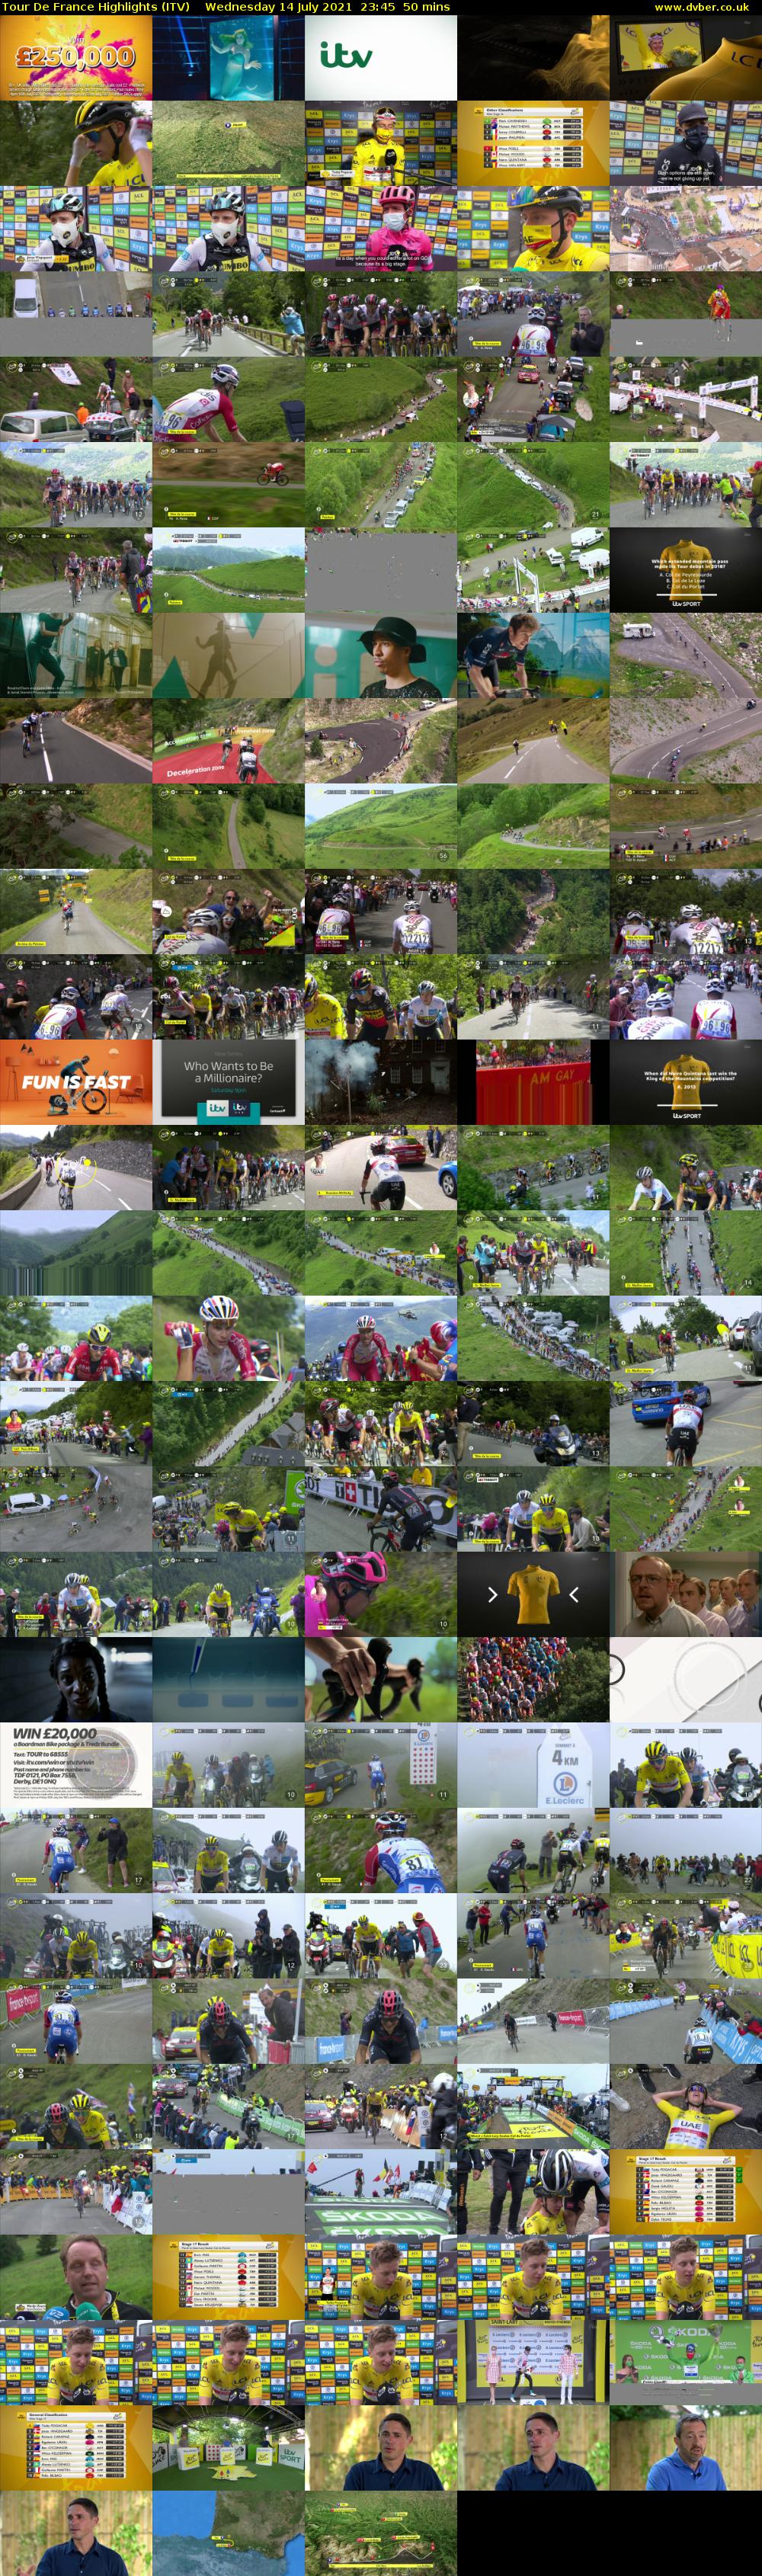 Tour De France Highlights (ITV) Wednesday 14 July 2021 23:45 - 00:35